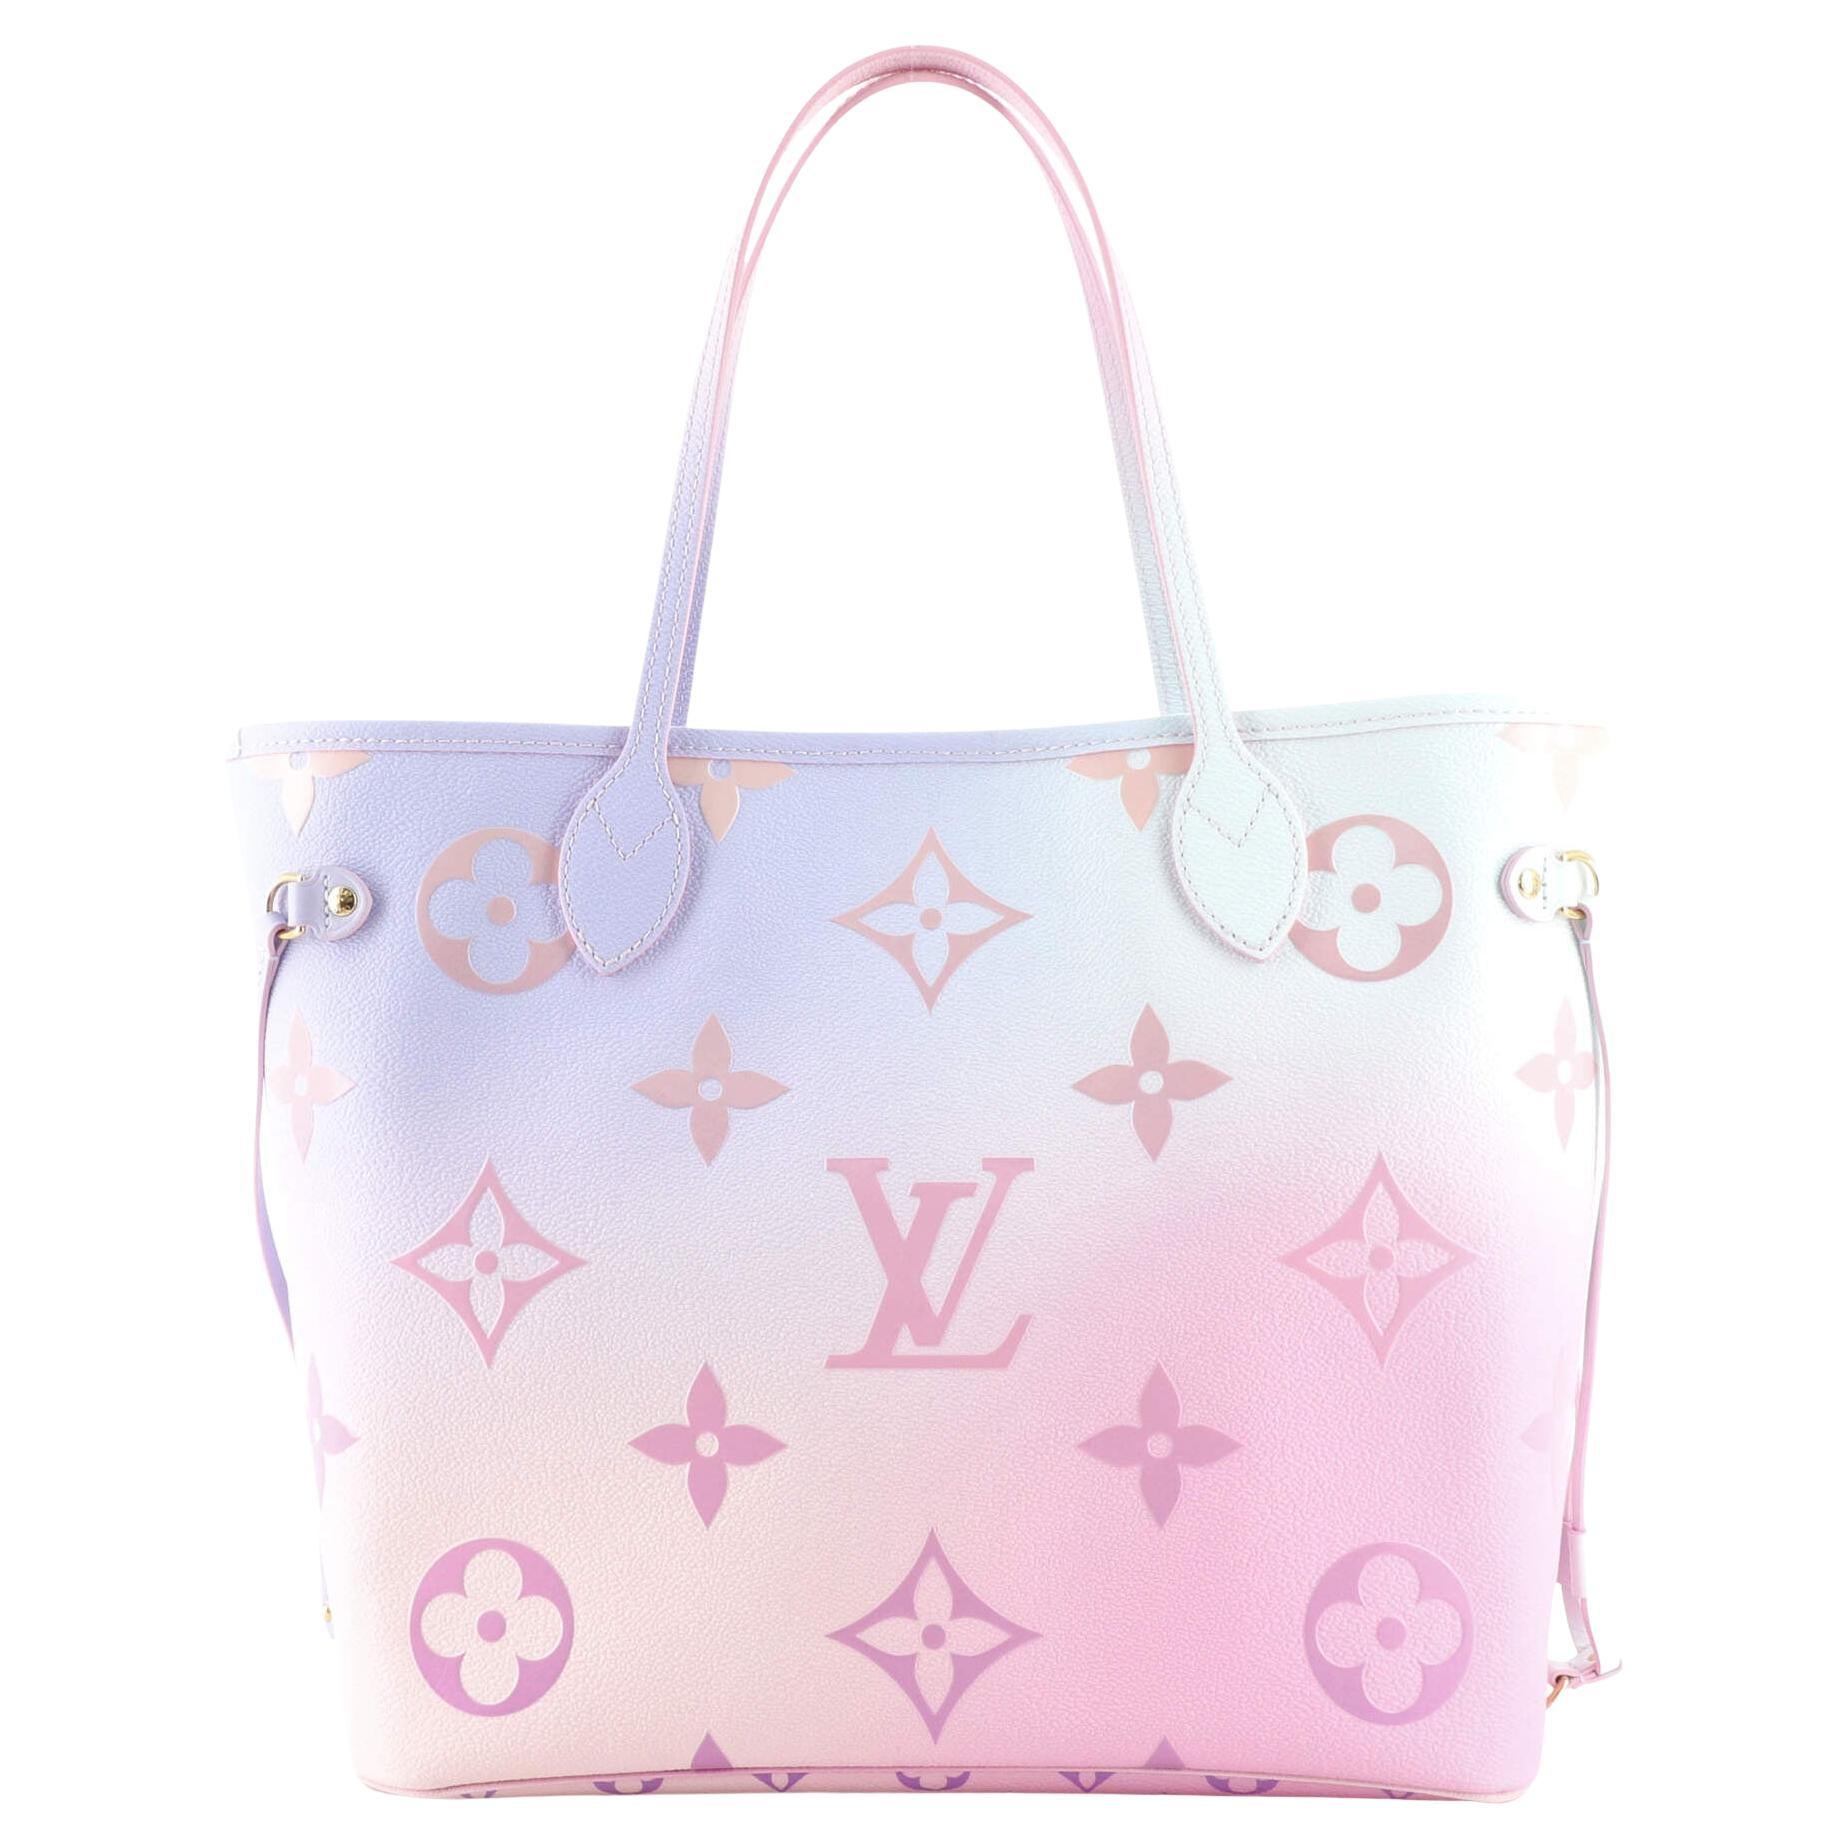 Louis Vuitton Neverfull mm Spring City Leather Tote Shoulder Bag Bicolor